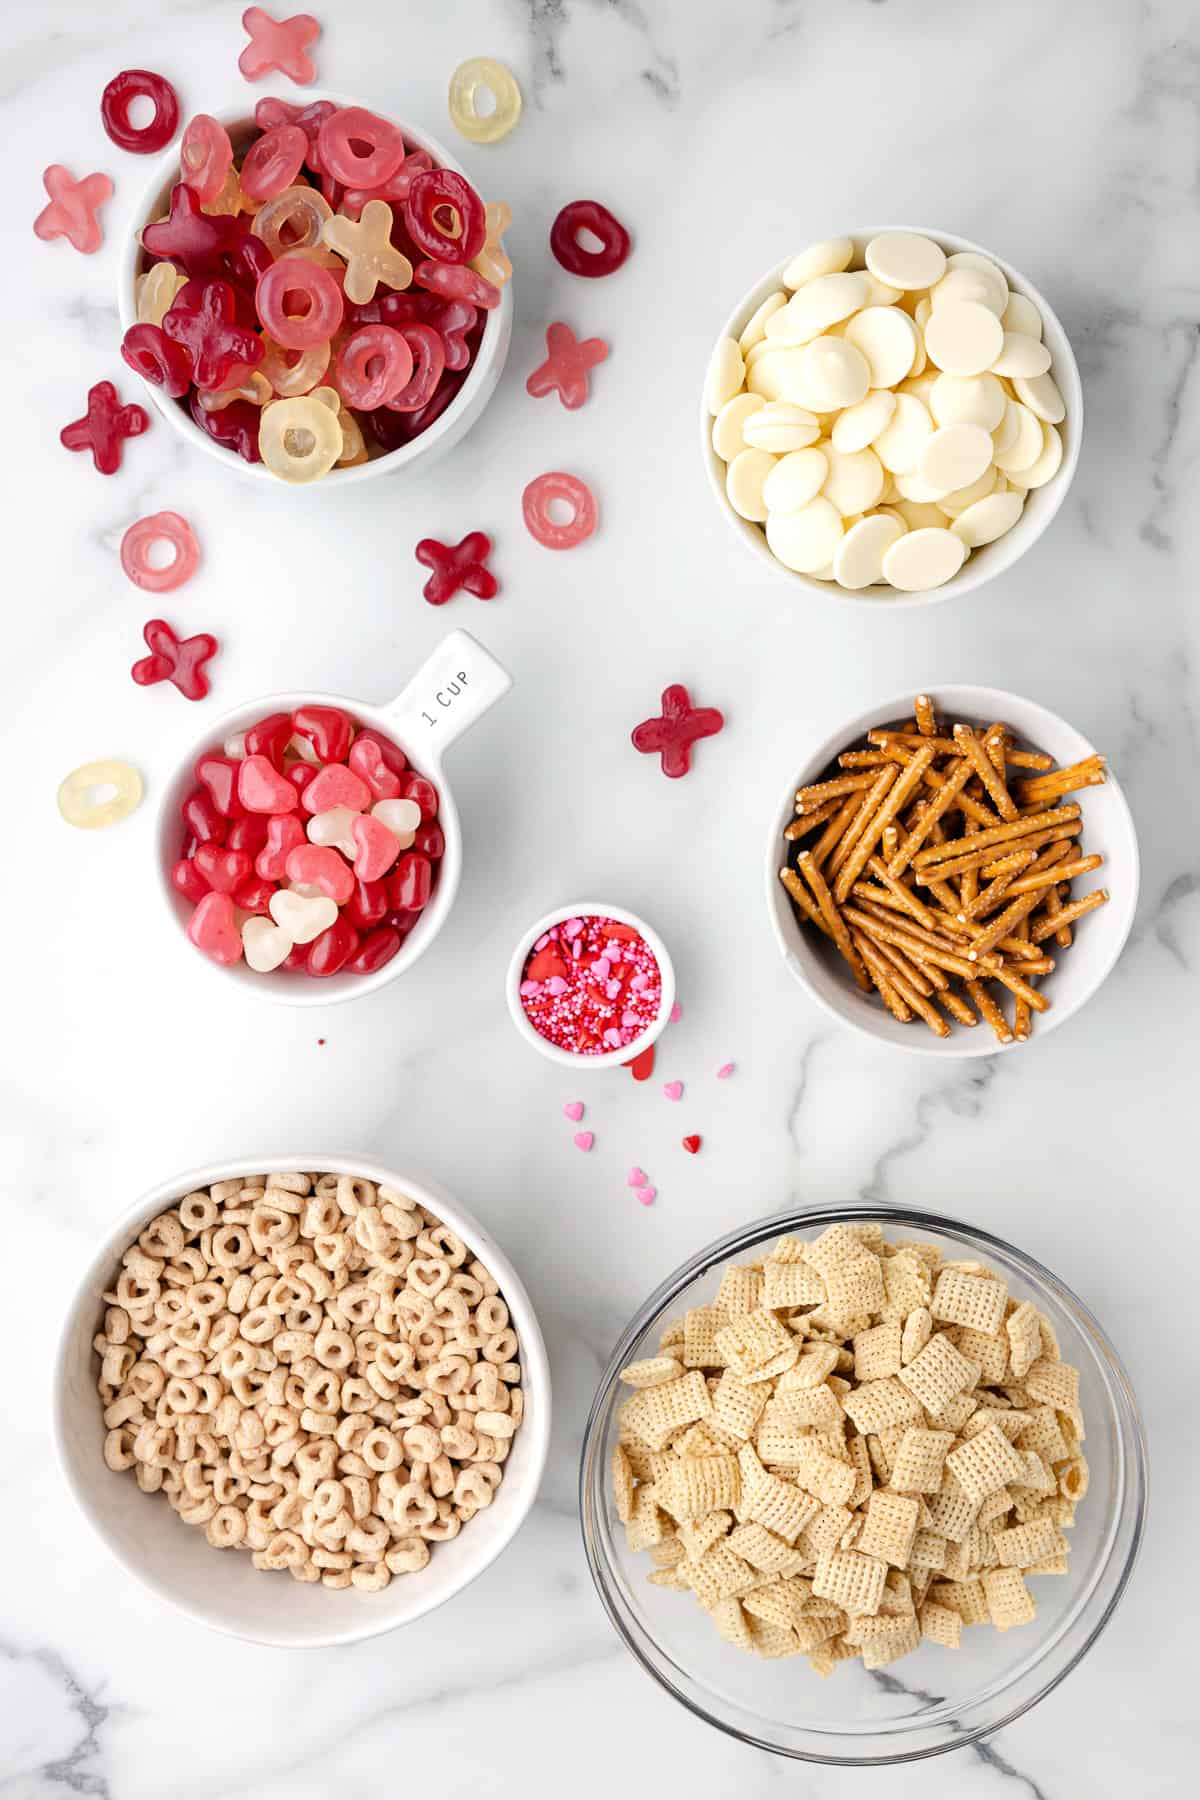 Ingredients for making Valentine chex mix.